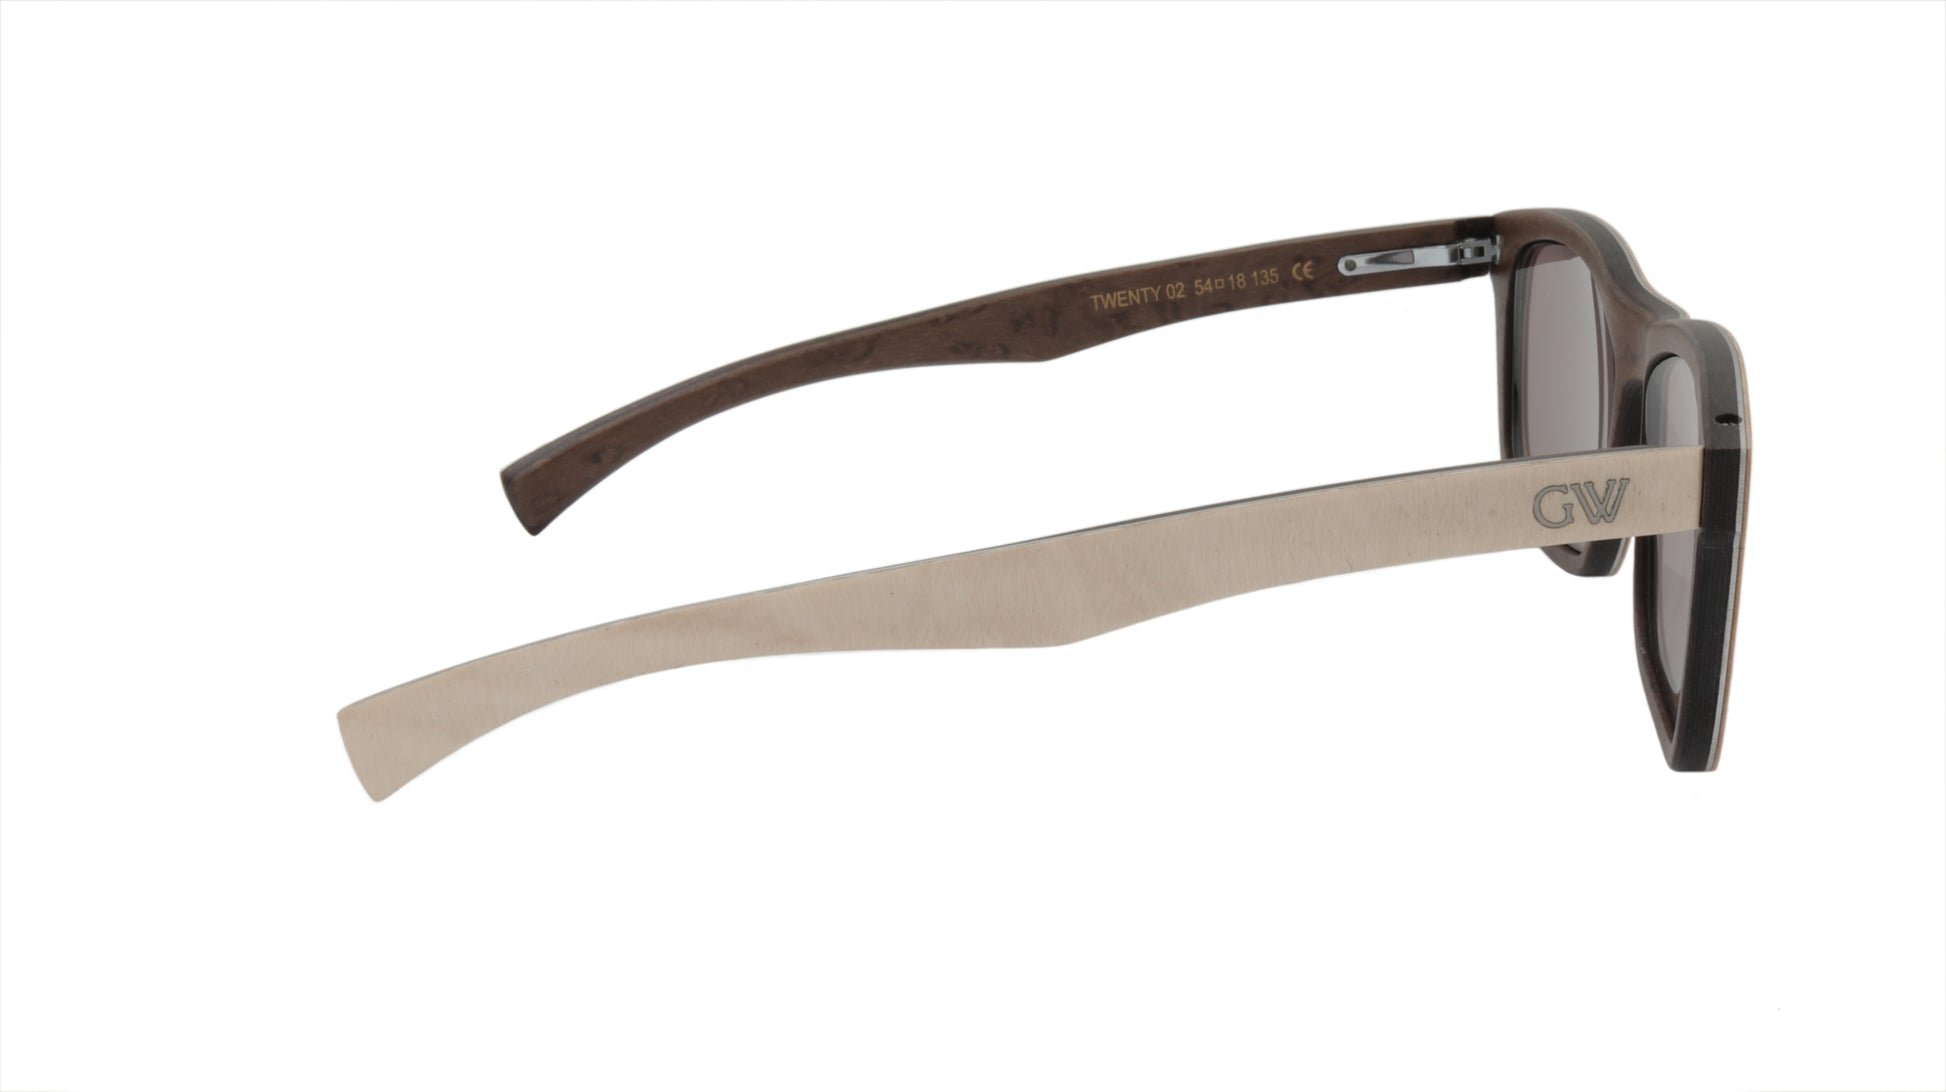 Gold & Wood Sunglasses Made in Luxembourg of Specialty Wood and Metal